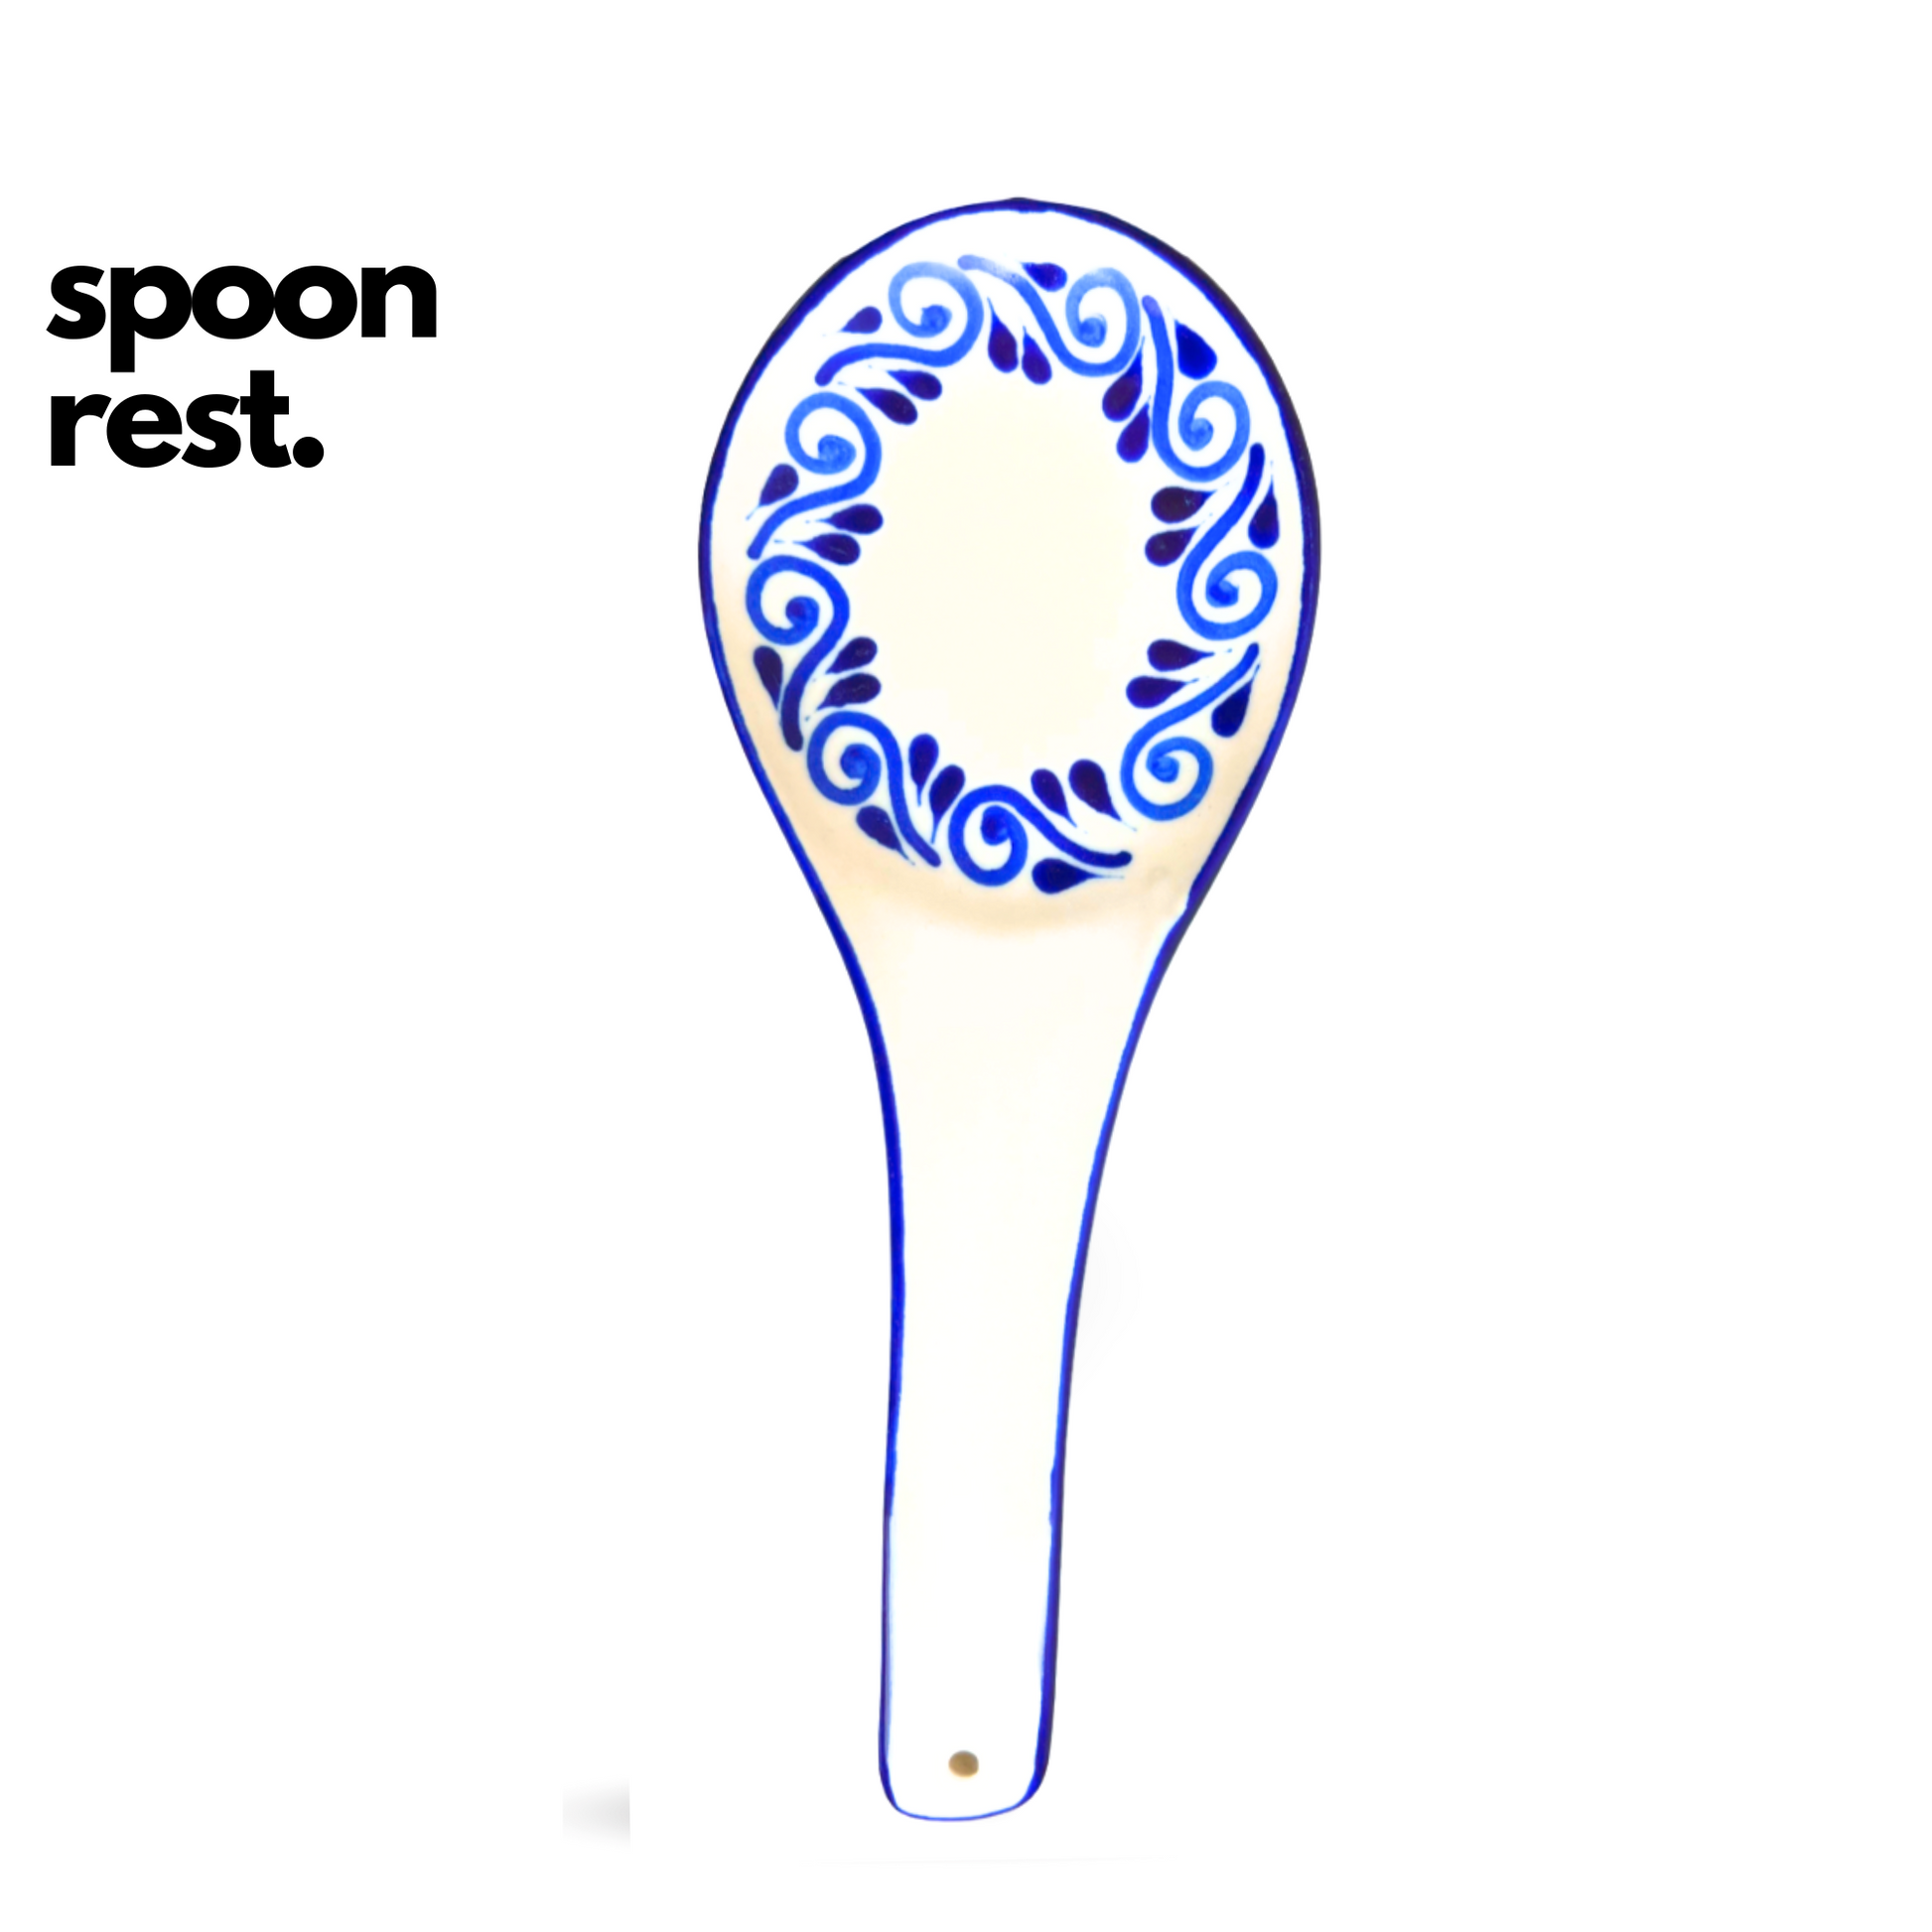 Hand-painted Talavera ceramic spoon rest, measuring 11" by 4" and 1" deep, perfect for holding kitchen utensils.